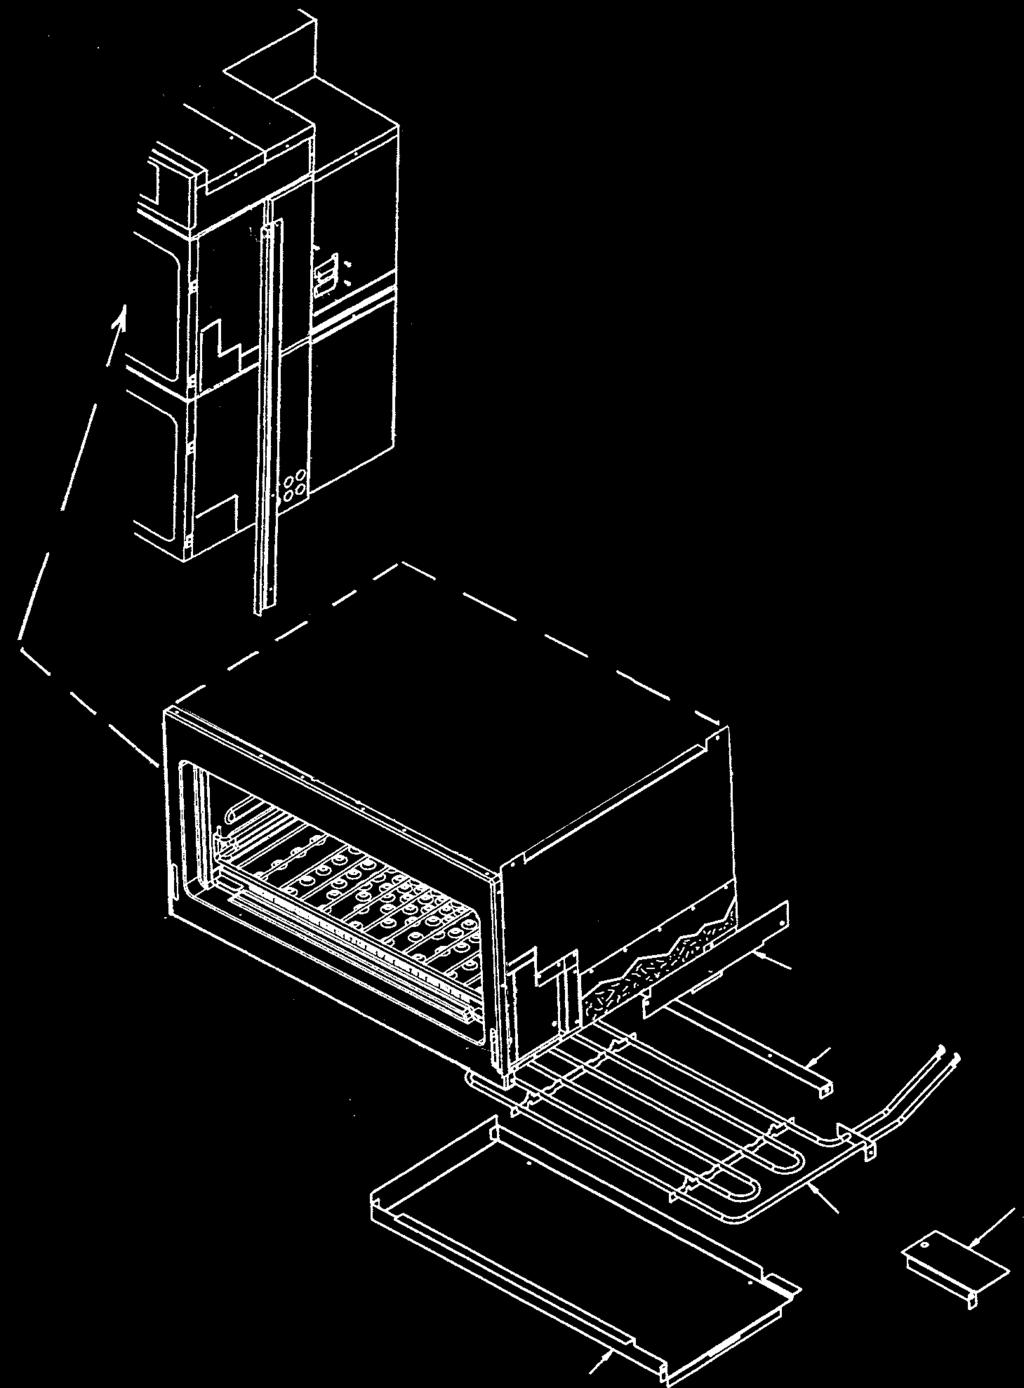 NOTE: The Jet Plate Element is concealed under the base of the CJ Upper Oven Module.